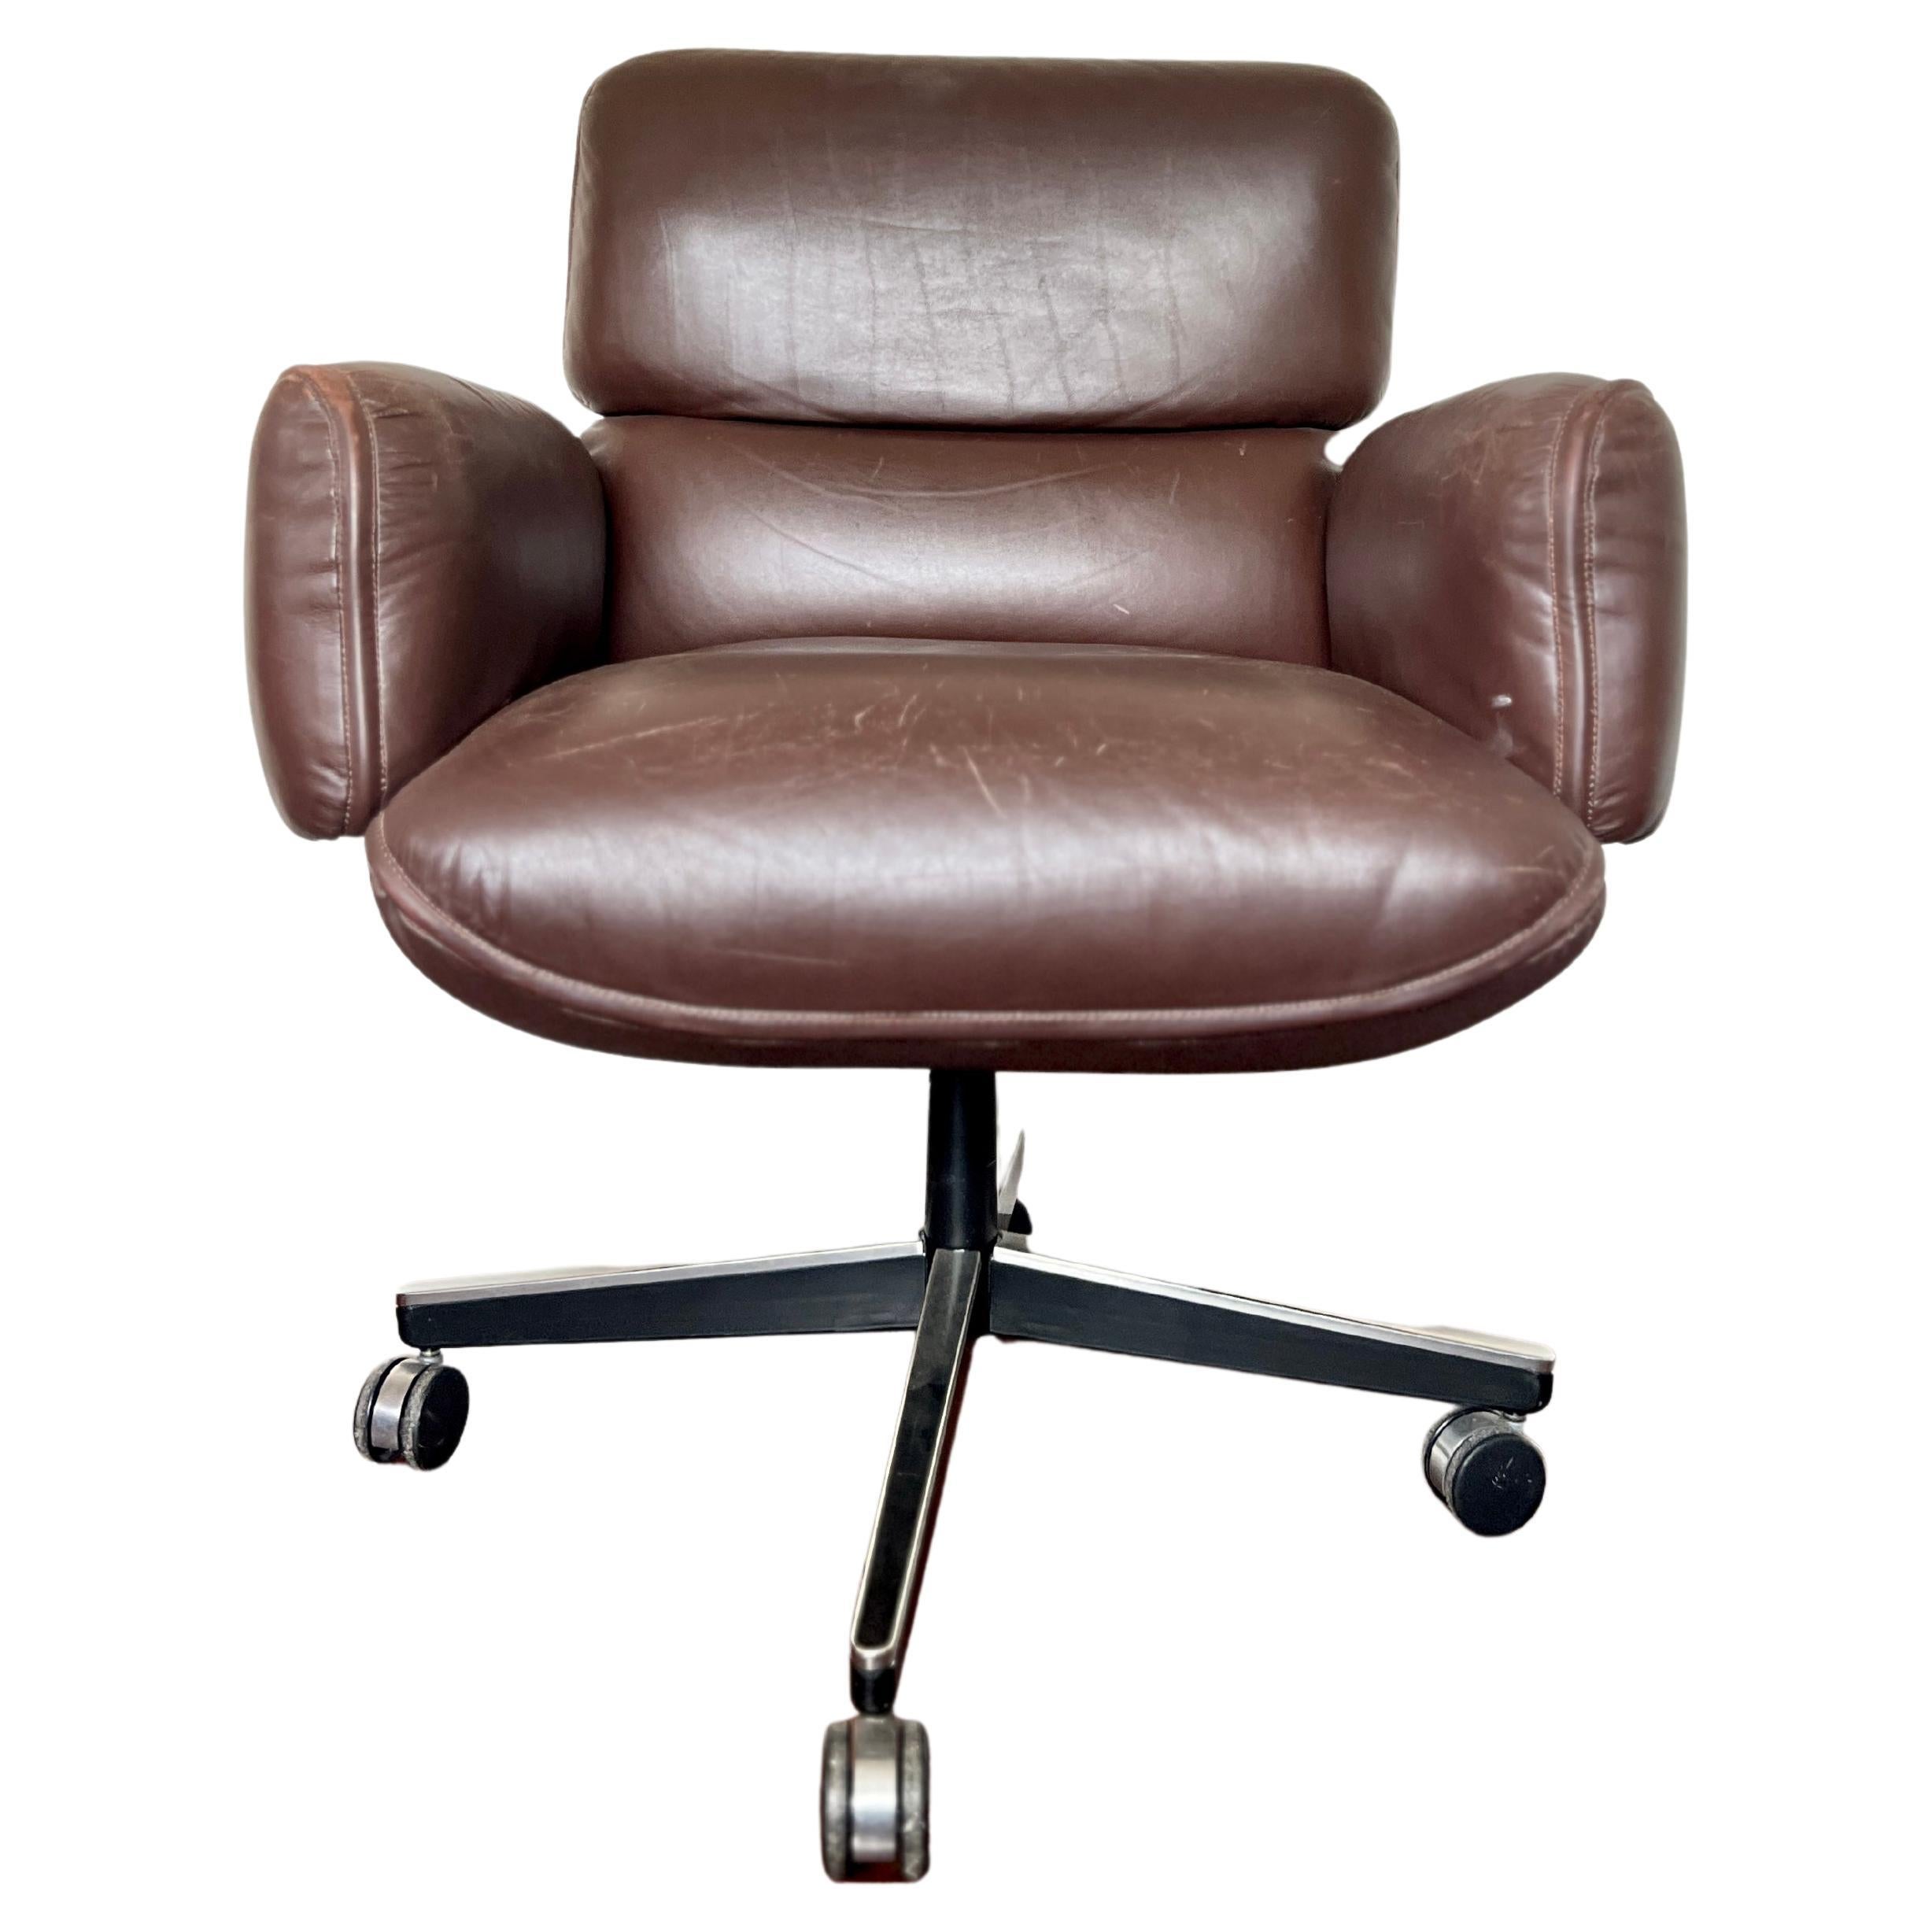 Mid-Century Modern Leather Desk Chair by Otto Zapf for Knoll International 1970s